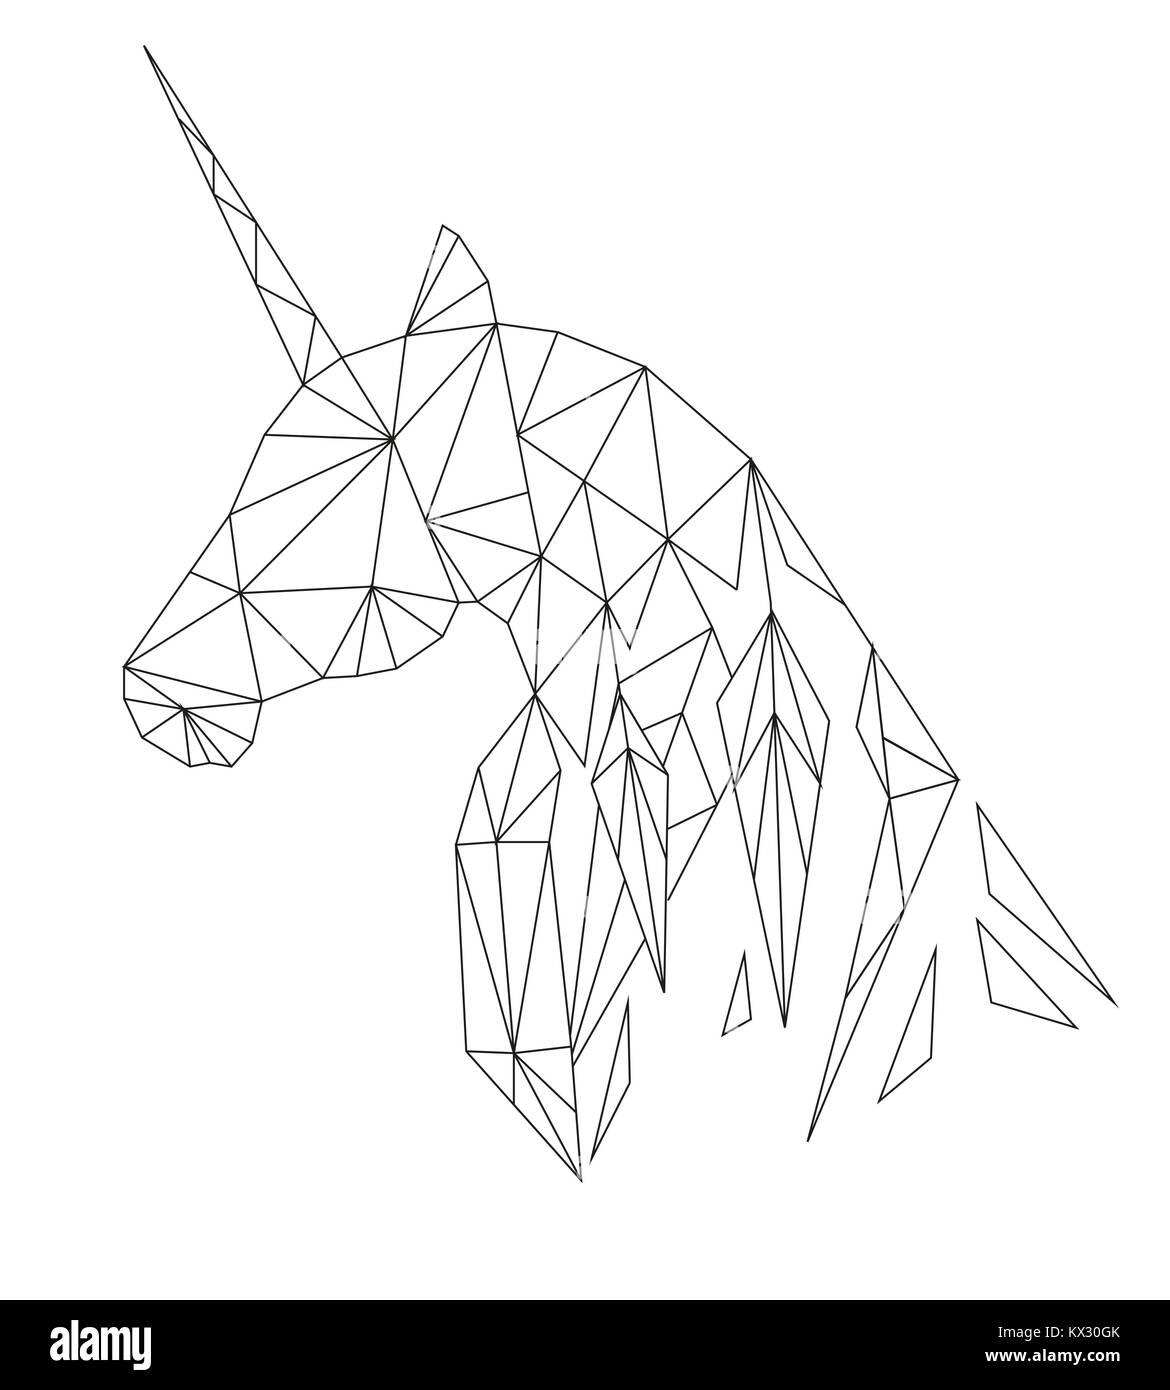 Unicorn's head in the polygonal style. Isolated on white background. Vector illustration Stock Vector